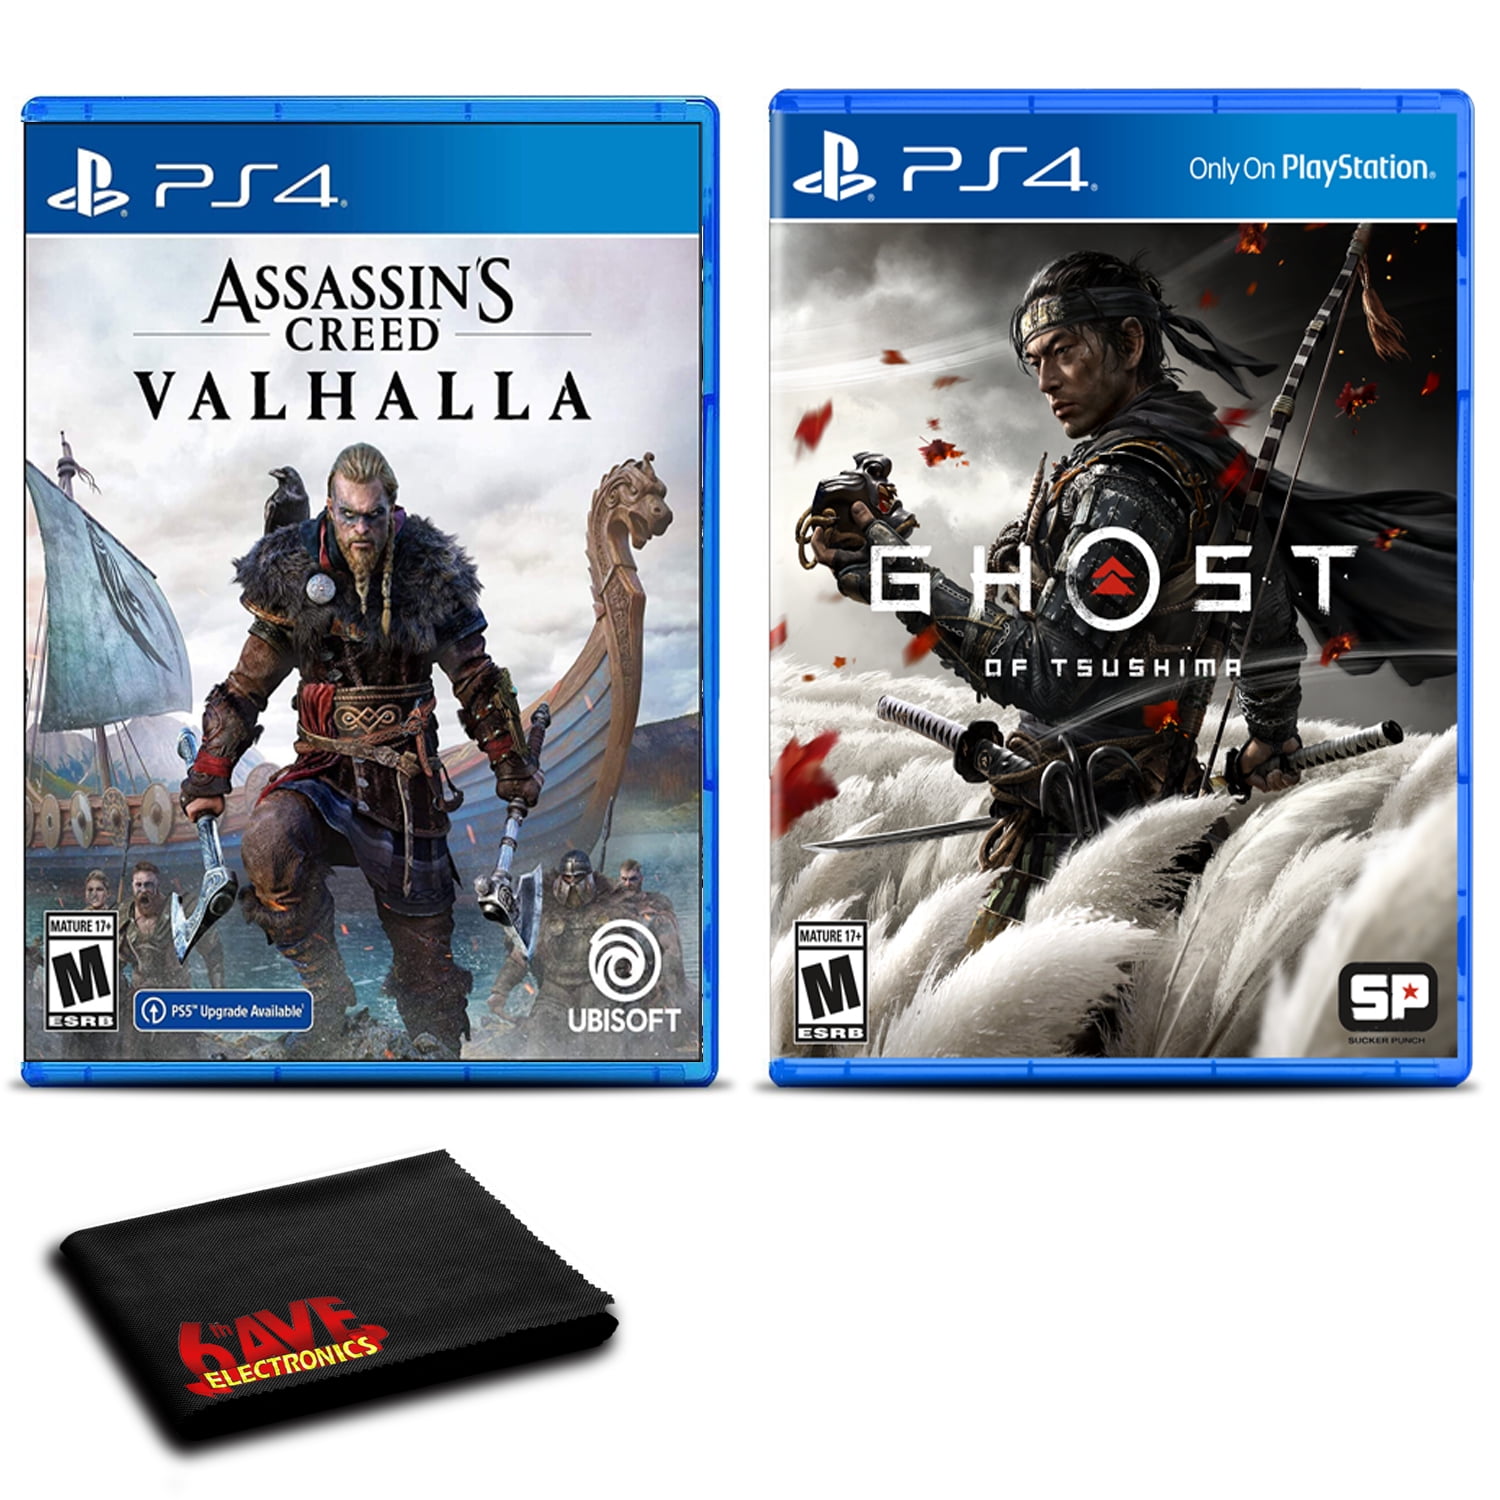 Assassins Creed Valhalla + Ghost of Tsushima for PlayStation 4 - 2 Game Bundle